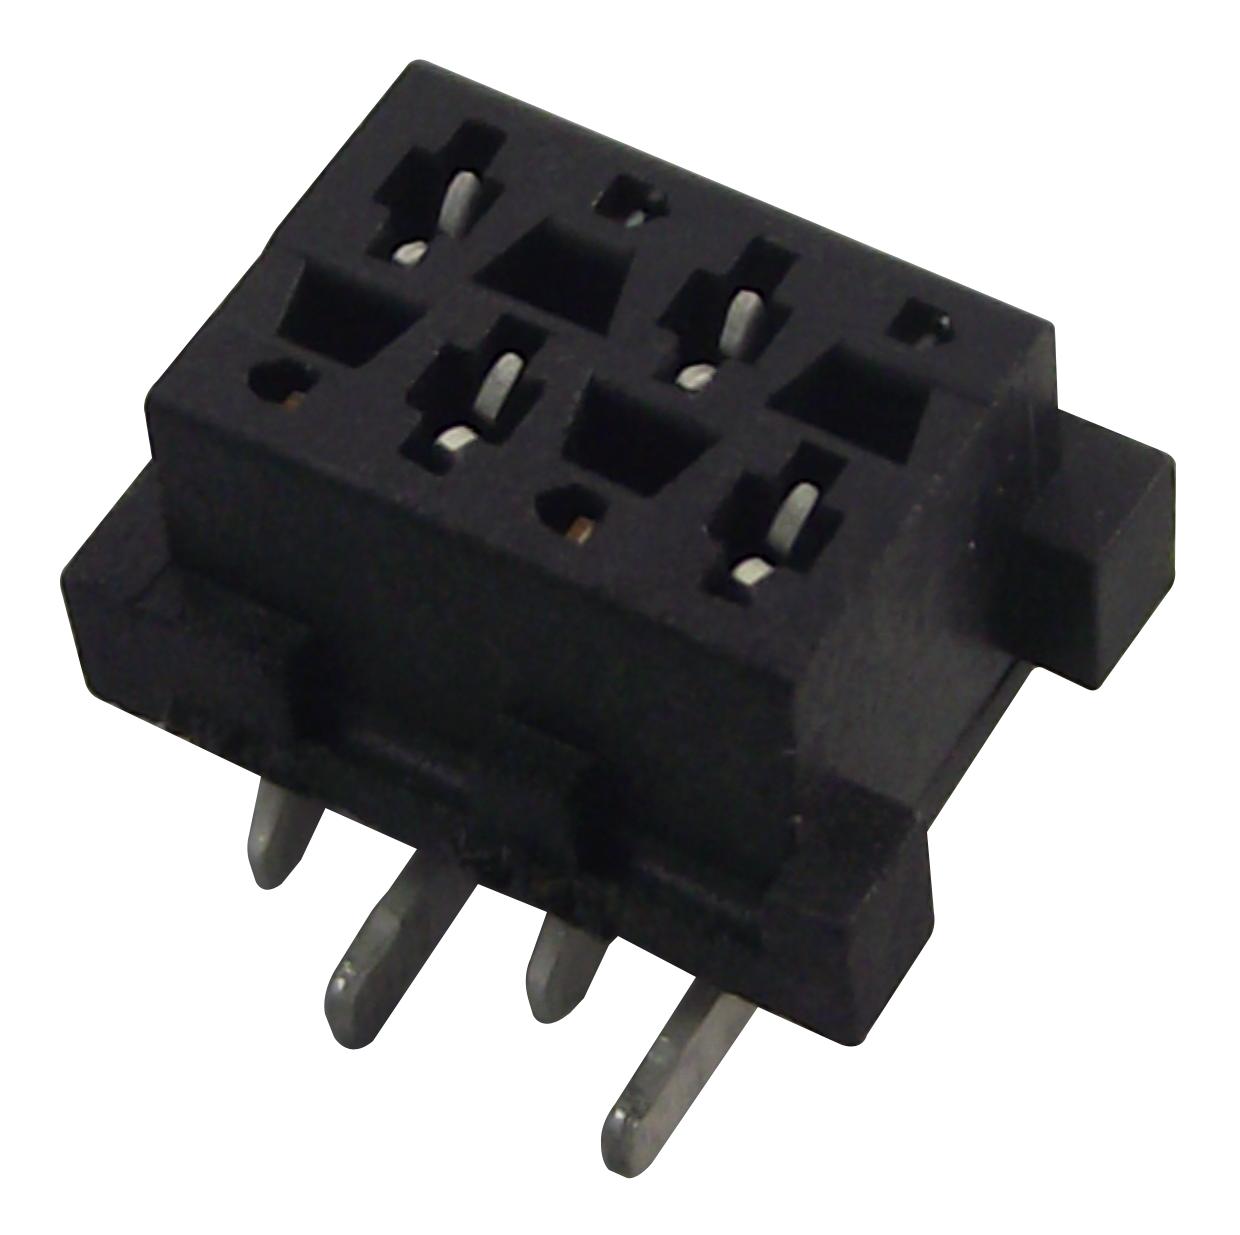 2178711-4 CONNECTOR, RCPT, 4POS, 2ROW, 1.27MM AMP - TE CONNECTIVITY